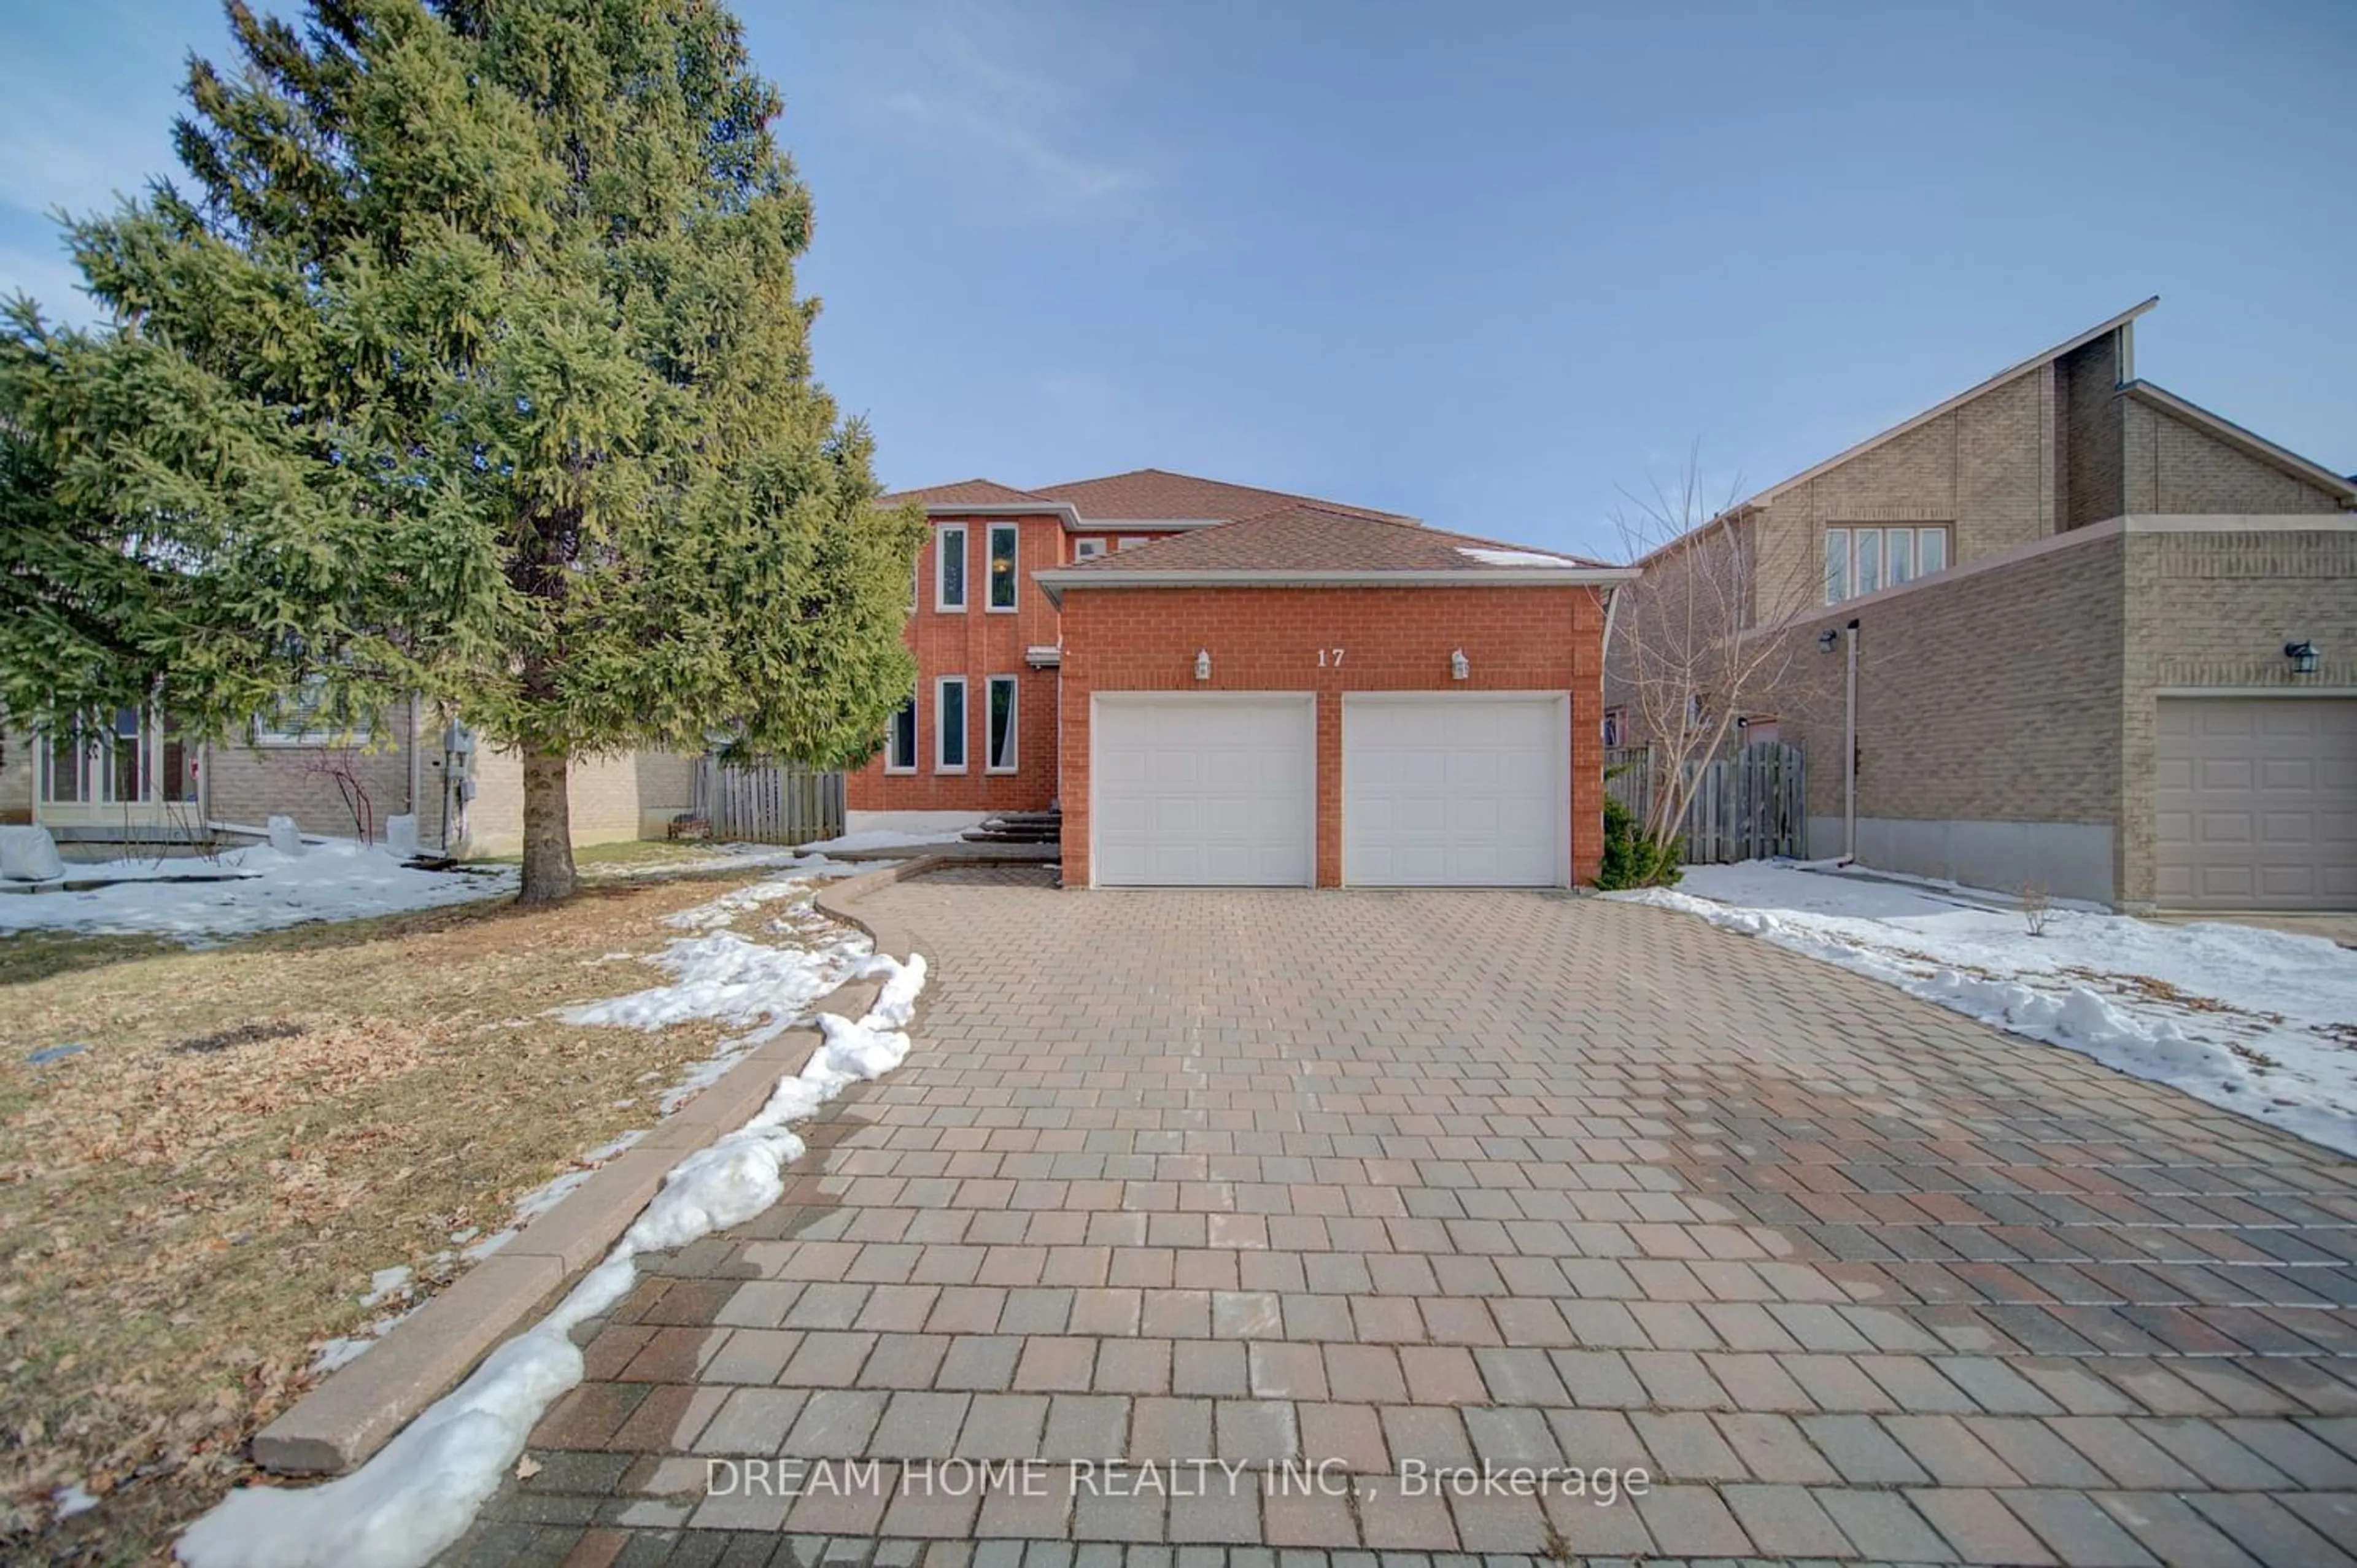 Street view for 17 Caldbeck Ave, Markham Ontario L3S 3H4